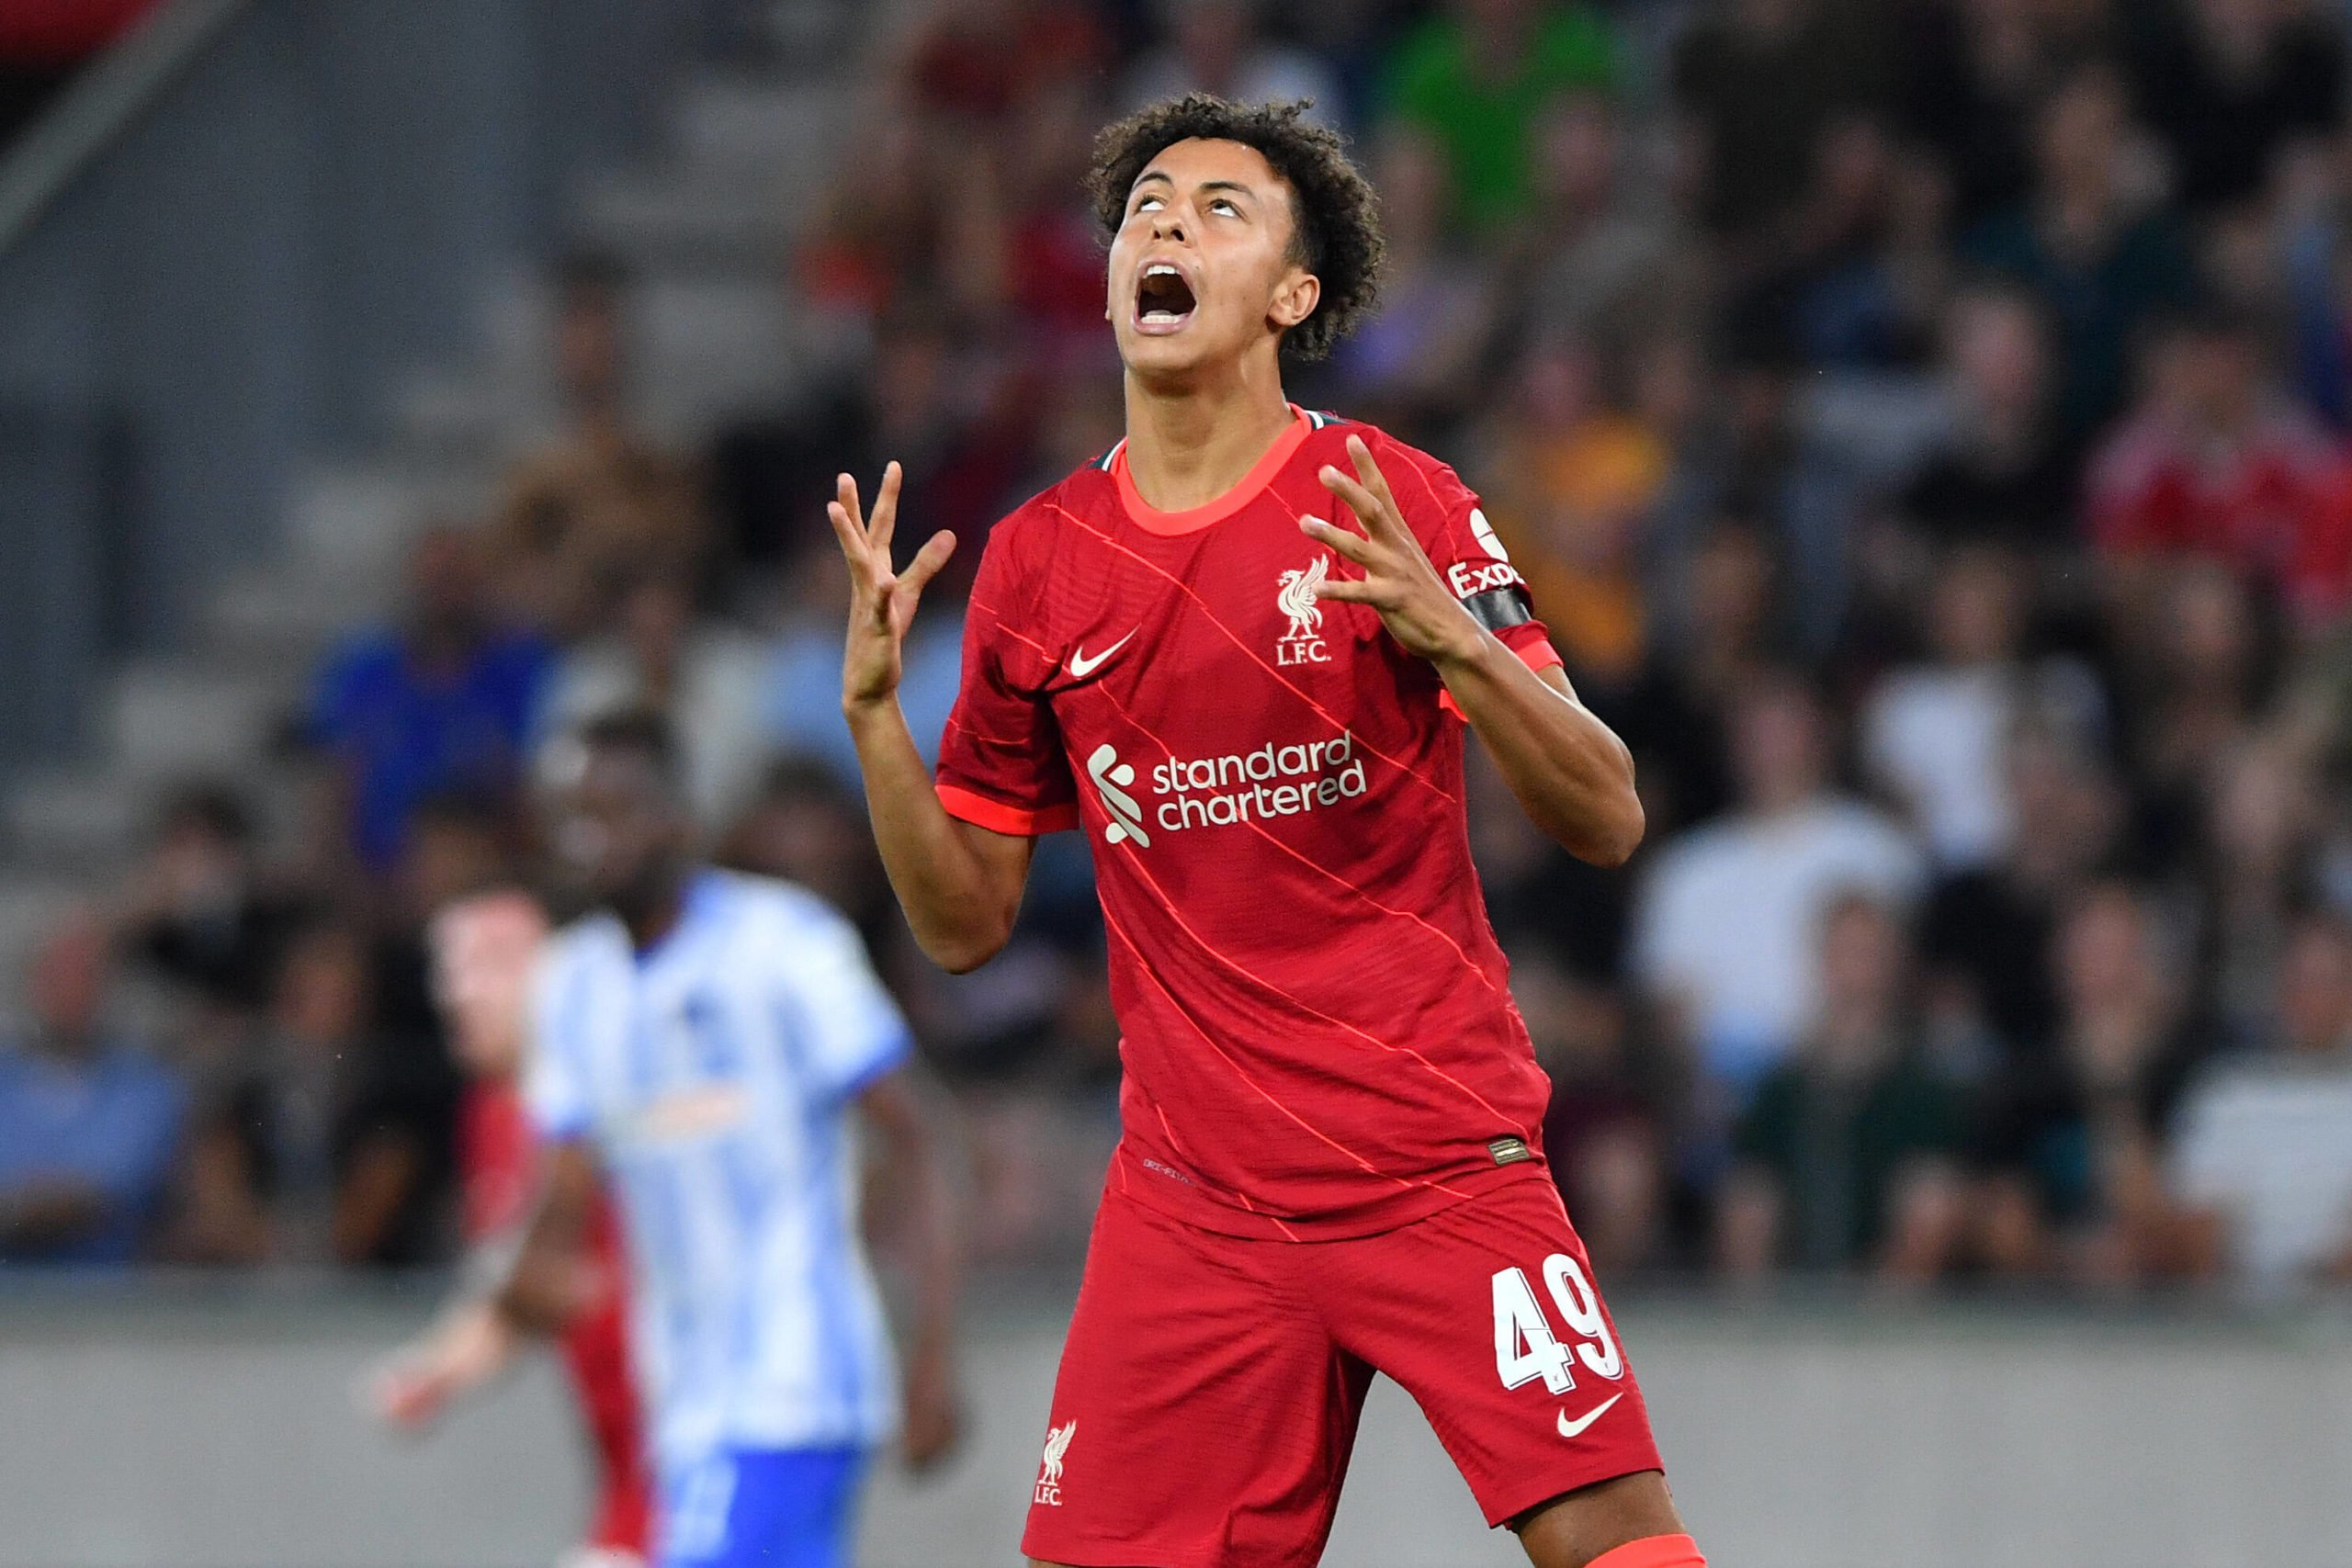 Liverpool teenager Kaide Gordon in action against Hertha BSC in a pre-season friendly 